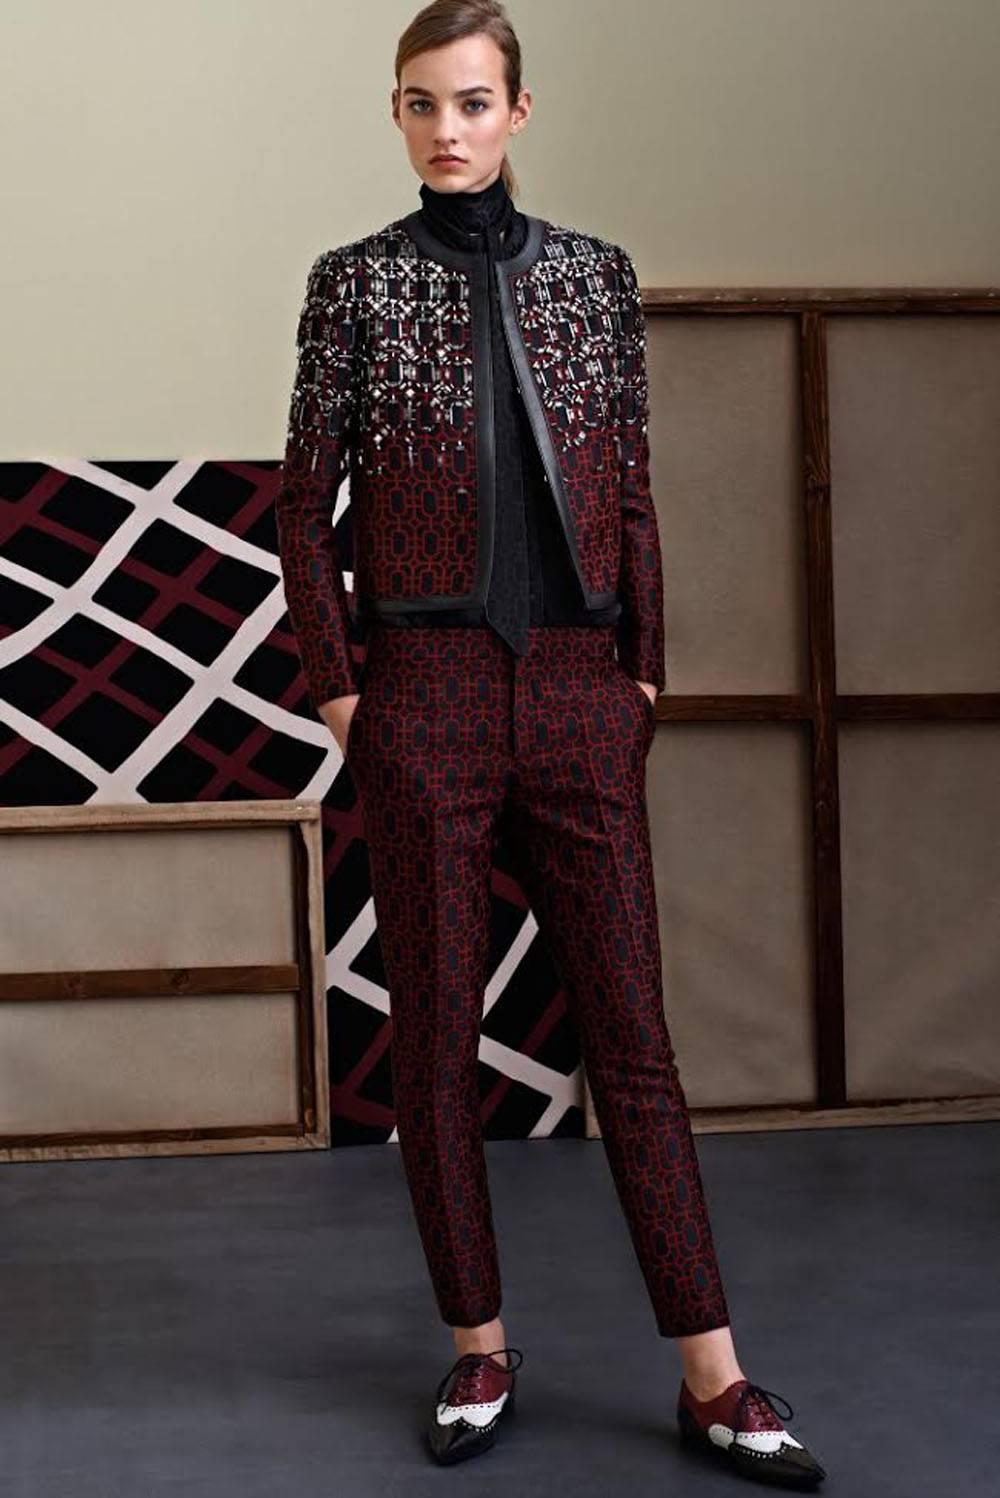 New Gucci Beaded Embellished Women's Pant Suit
Italian size 40 - US 4,6.
Colors - Burgundy/Black
Jacket: Crystal and Metal Embellishment, Black Leather Trim, Hooks Closure, Fully Lined.
Pants: Normal Waist, Four Pockets Style.
Fabric Content: 44%